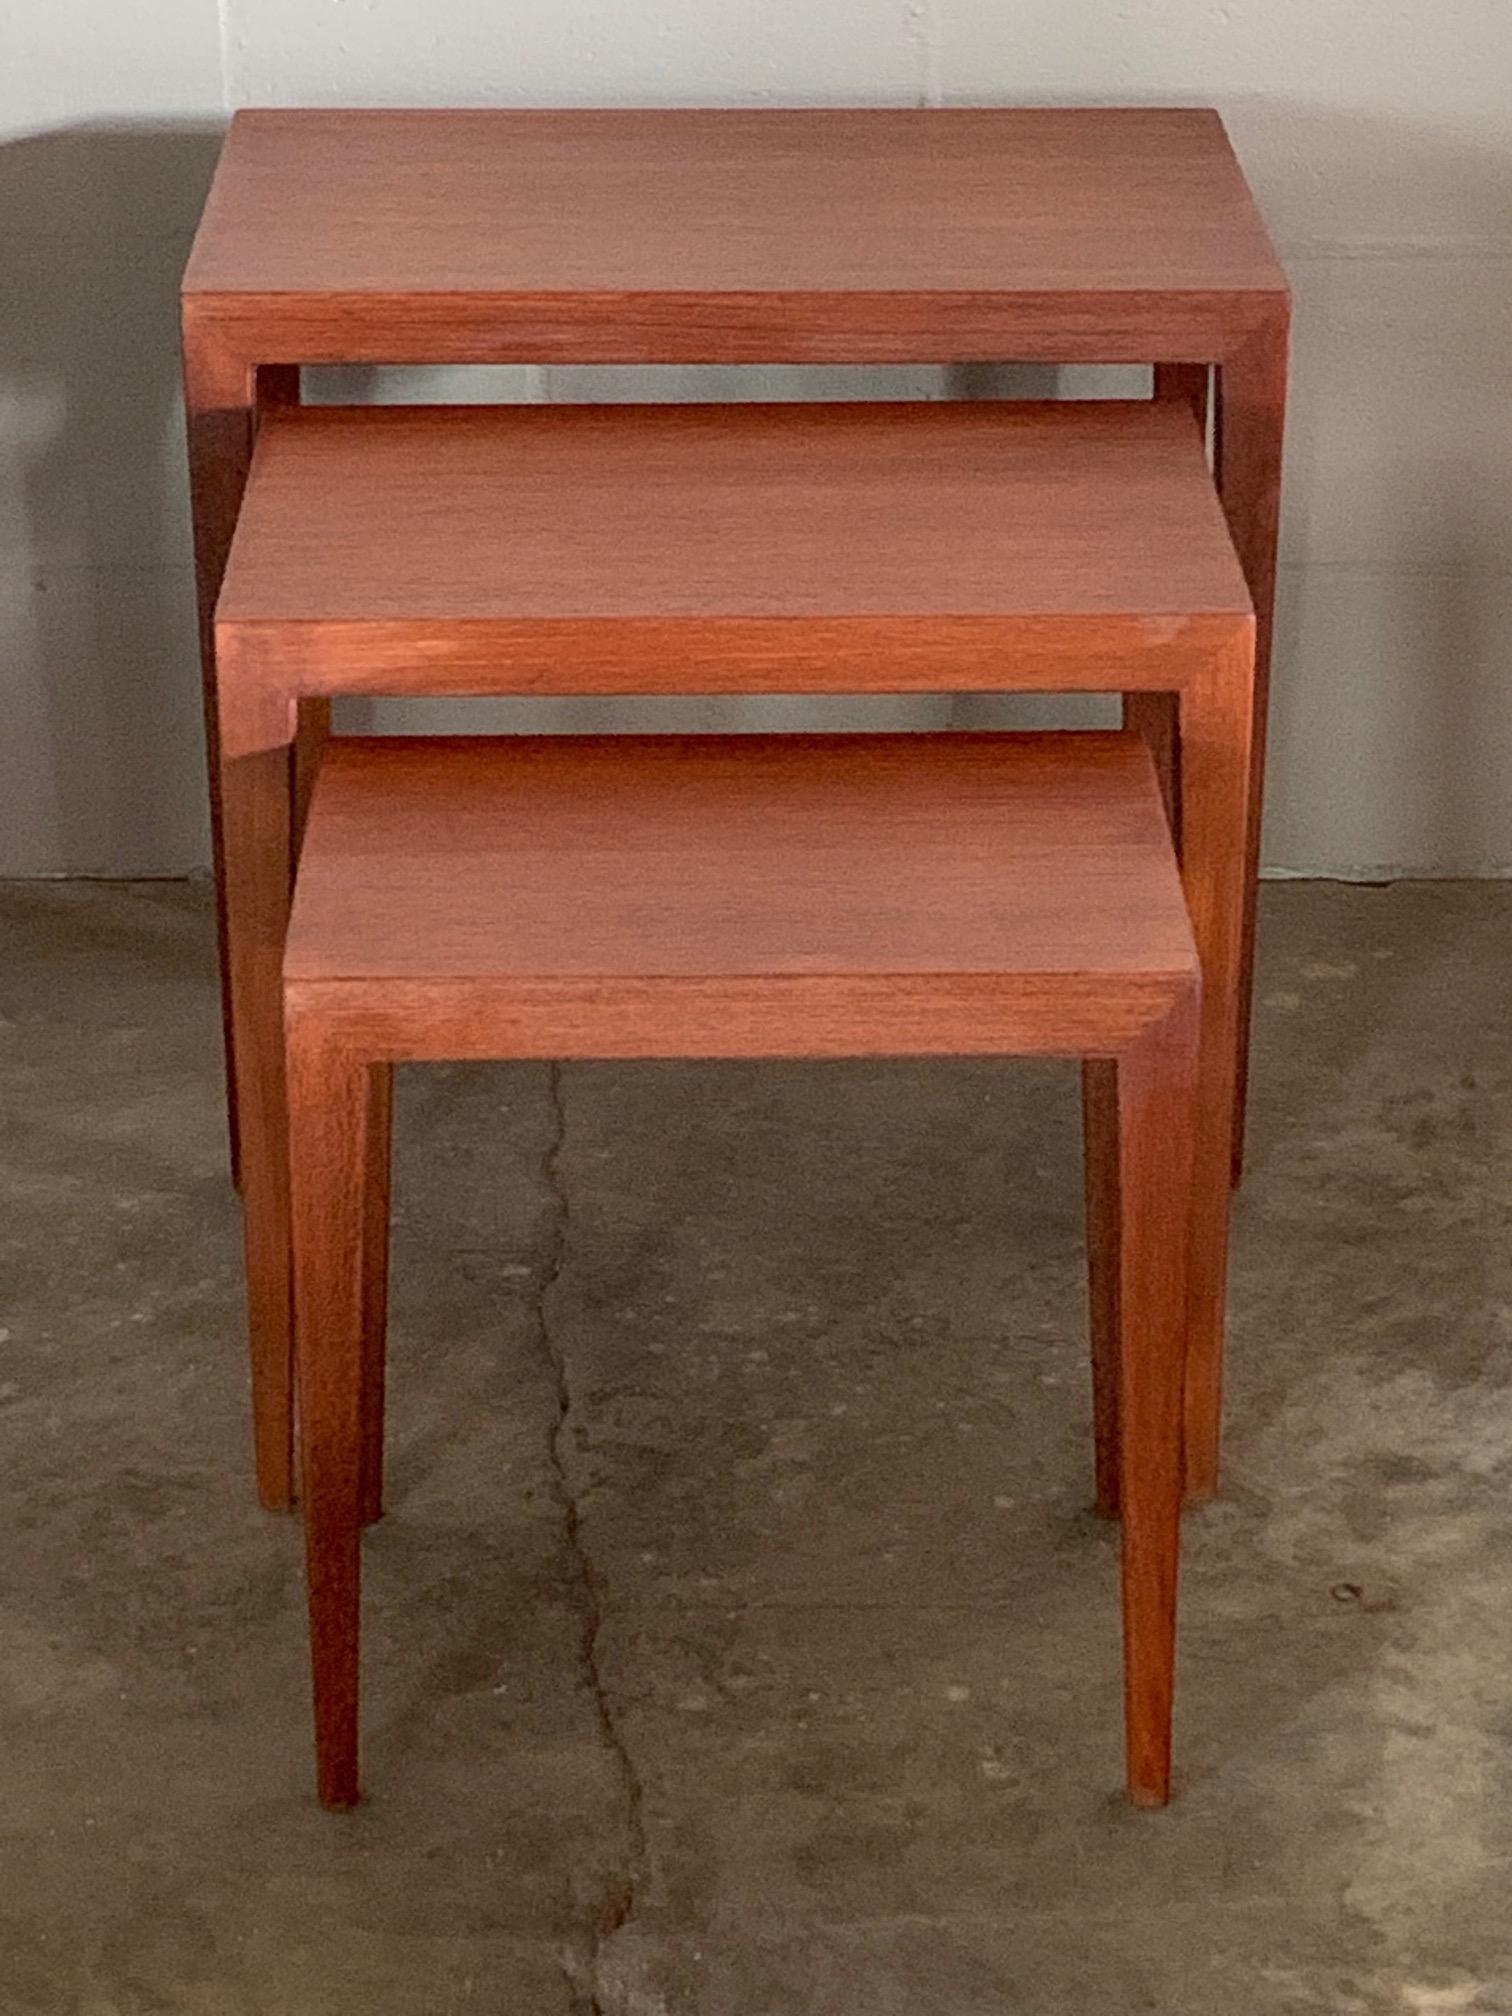 A great set of three nesting tables by Severin Hansen for Haslev. Made in Denmark, circa 1960s.
Elegant Minimalist design with nice patina and character. Largest table measures 22.25